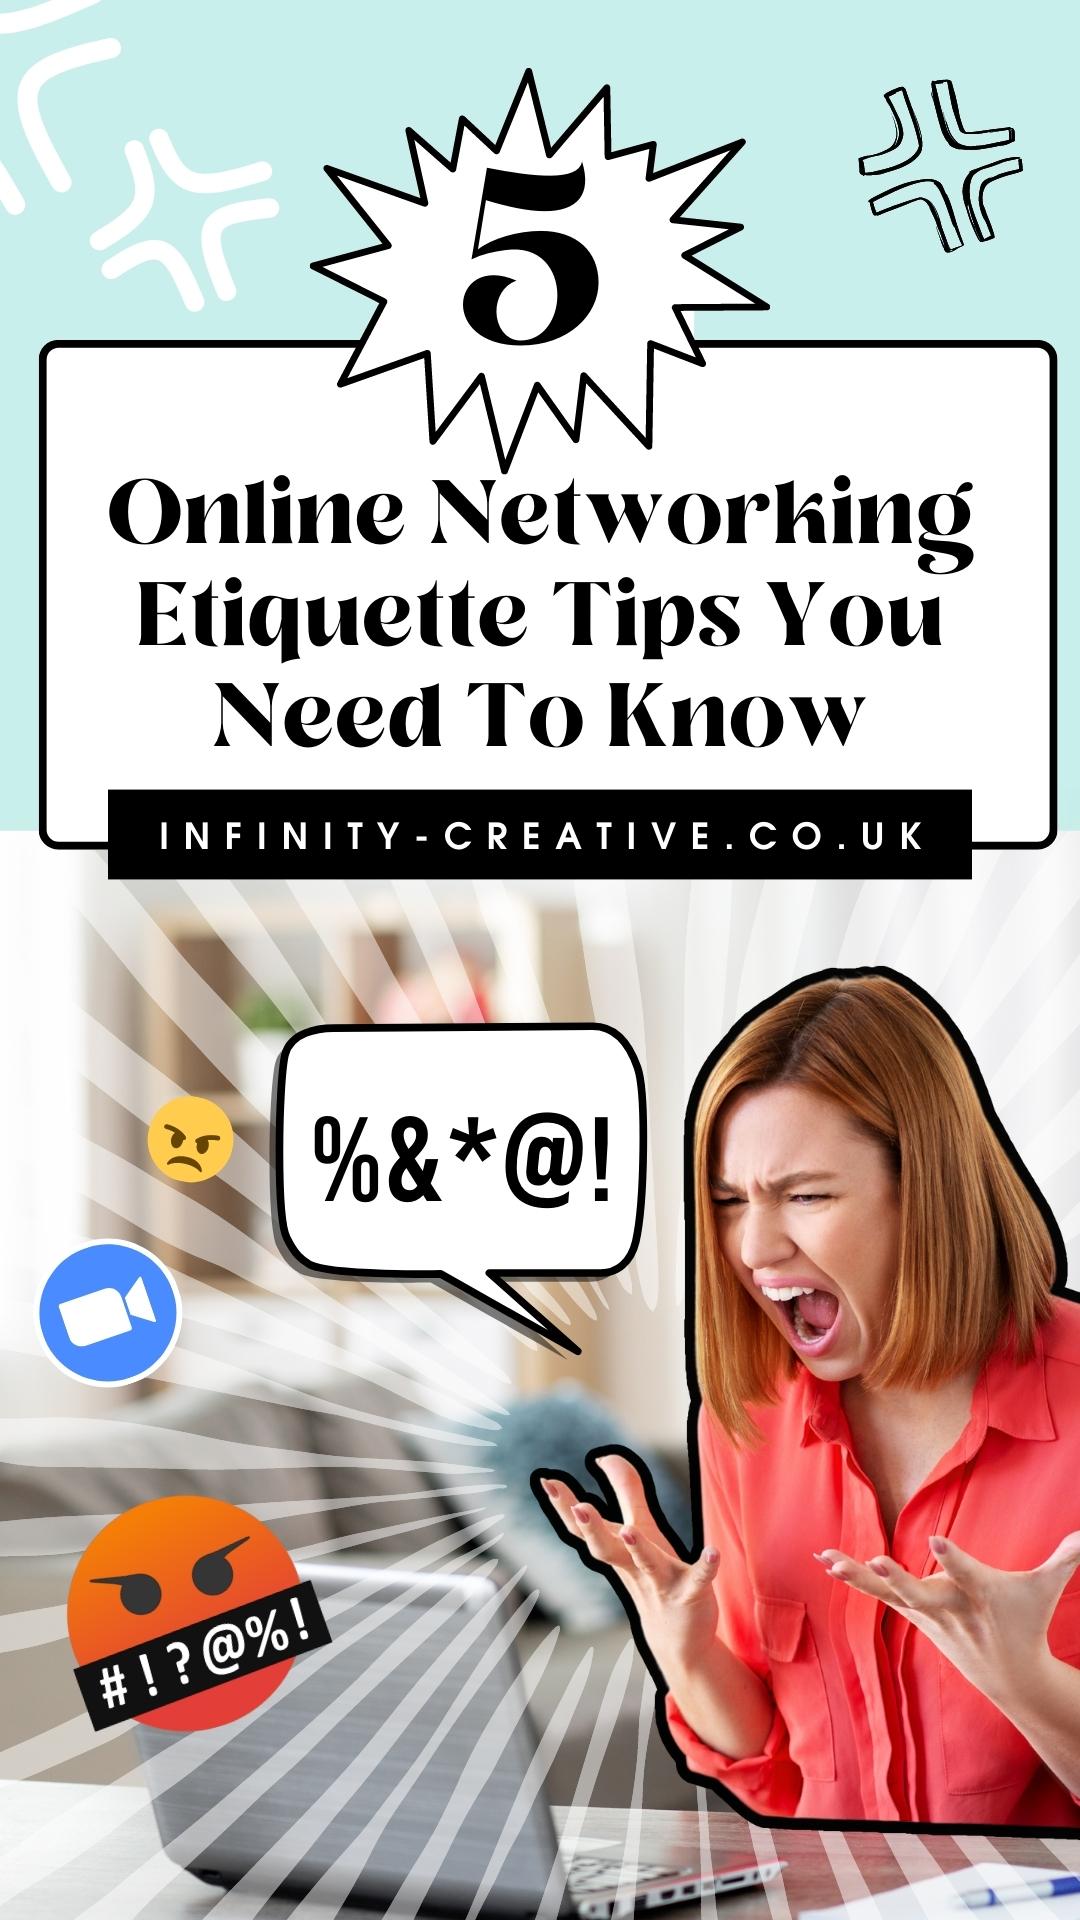 5 Online Networking Etiquette Tips You Need To Know